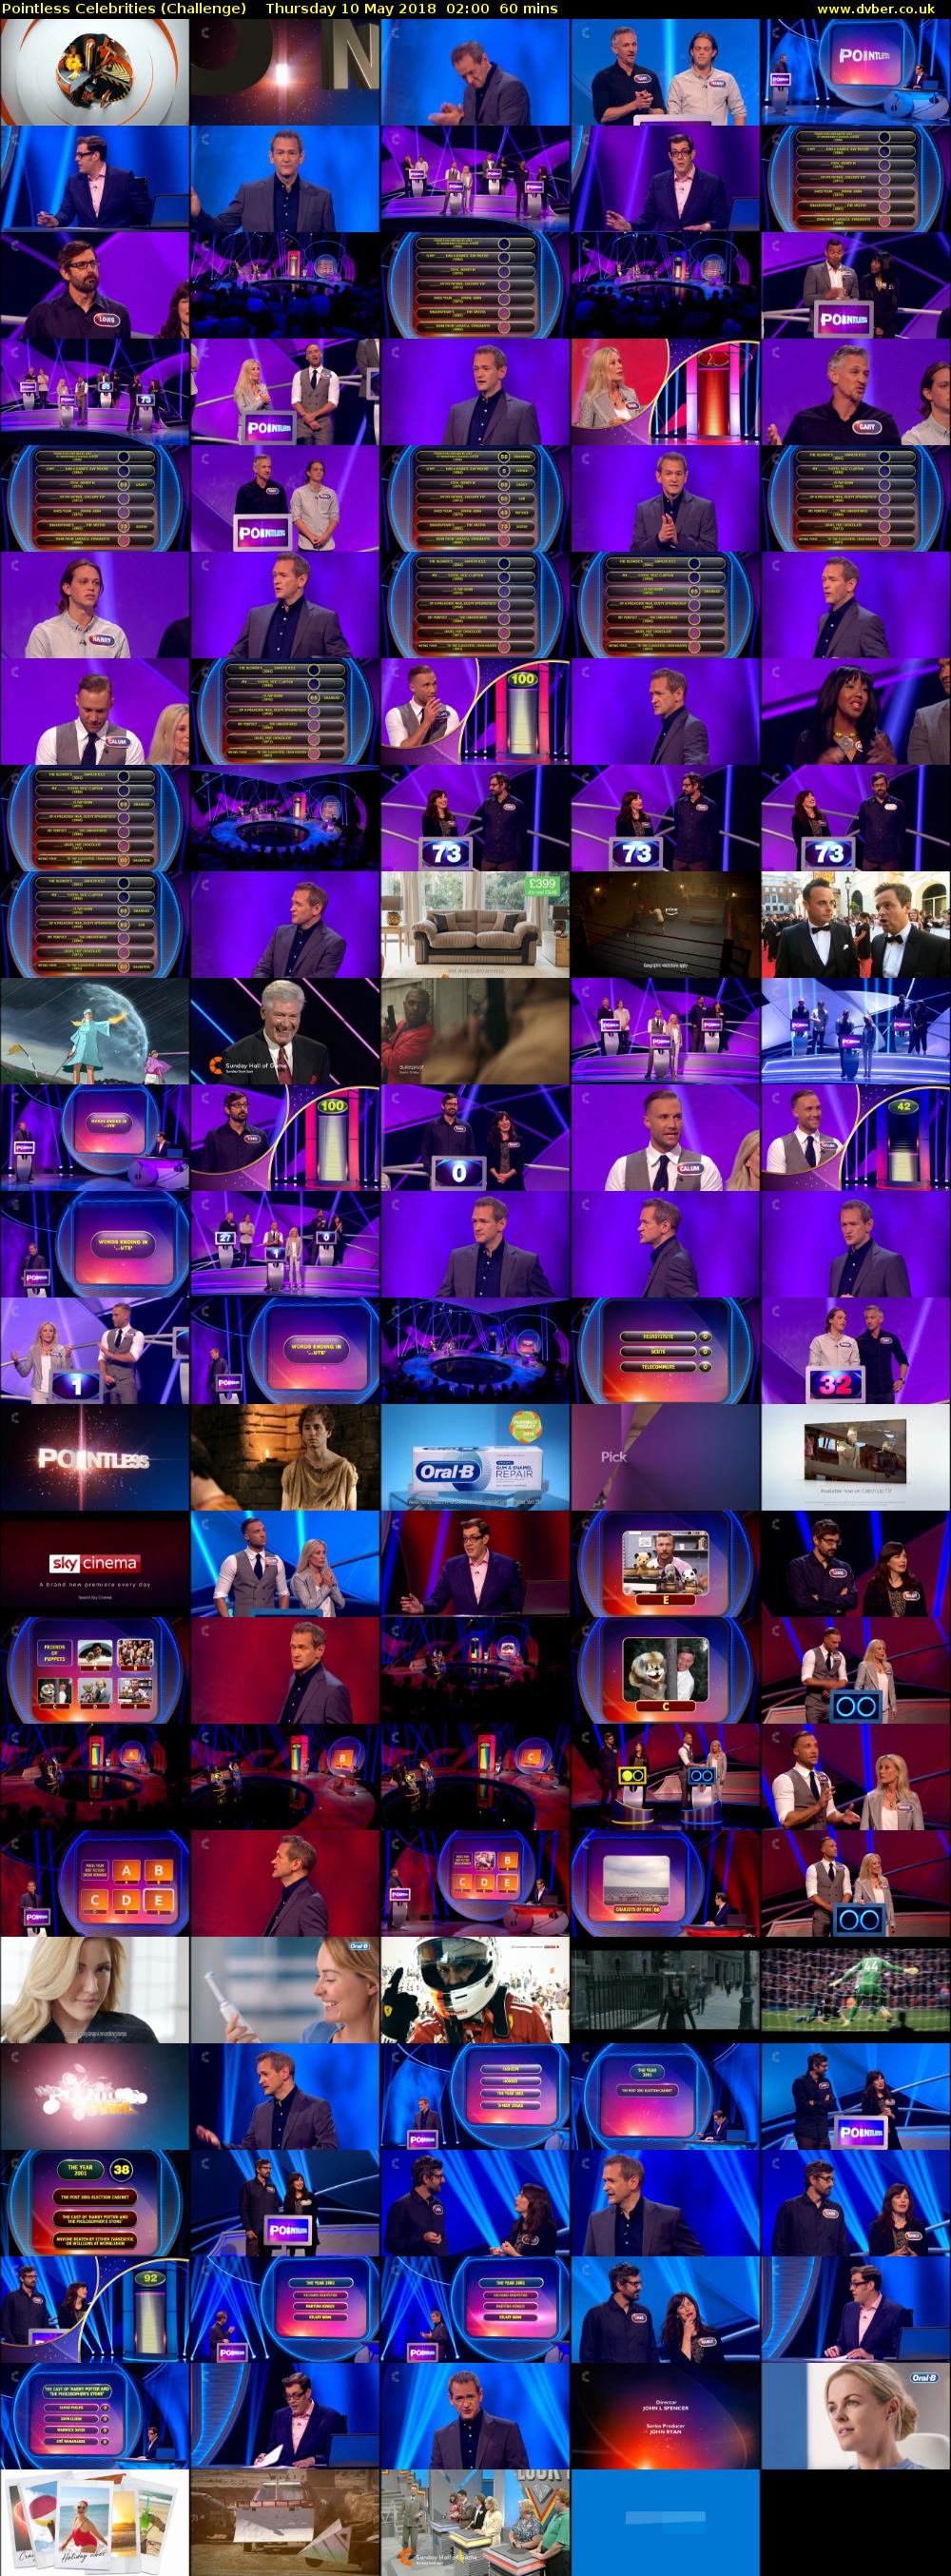 Pointless Celebrities (Challenge) Thursday 10 May 2018 02:00 - 03:00